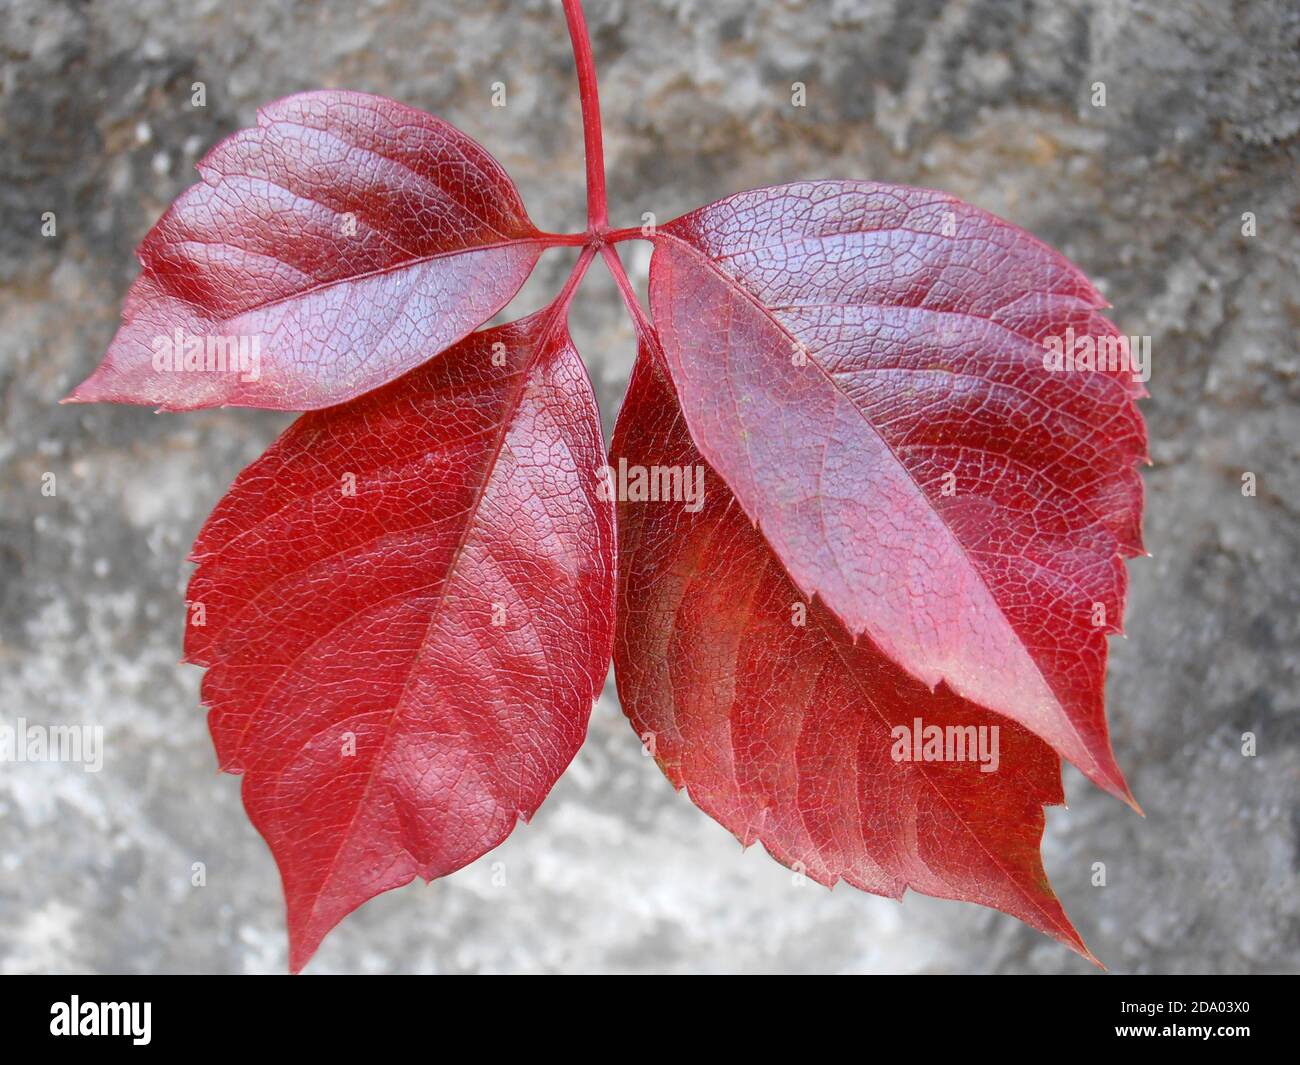 Red leaves with old wall background, red leaves macro, autumn leaves ,red leaves with patterns, macro photography, stock image Stock Photo